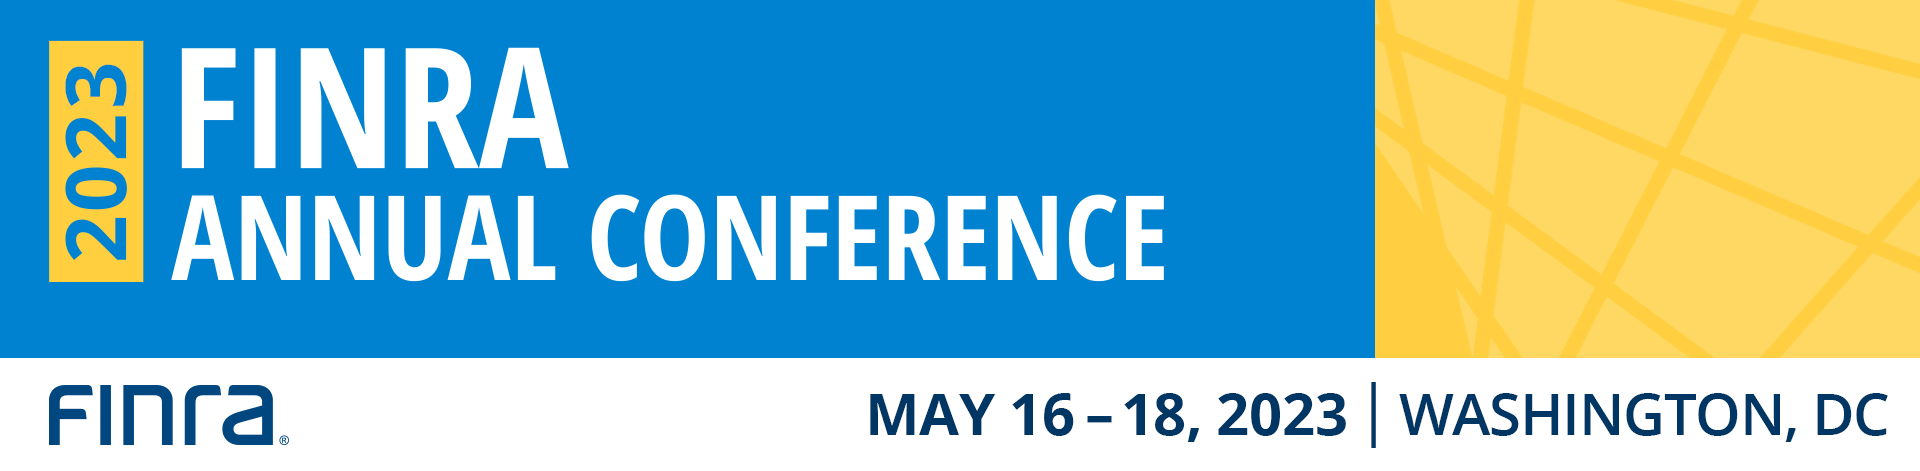 2023 FINRA Annual Conference | May 16-18 | Washington, DC